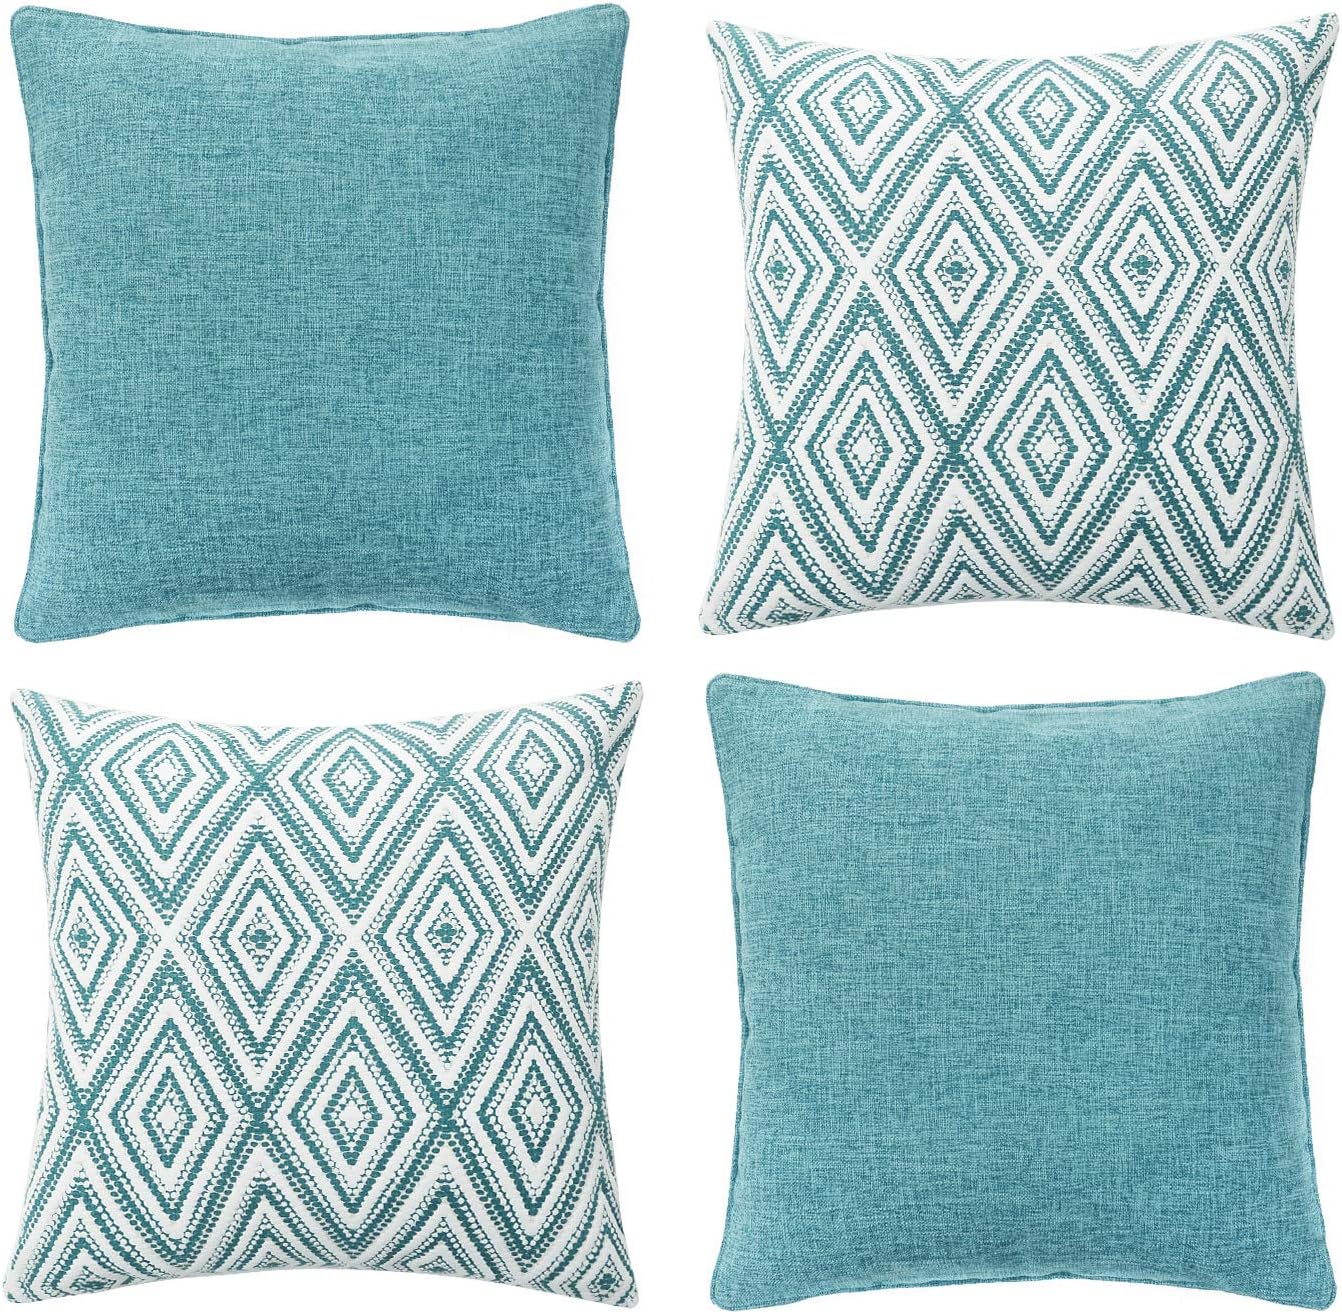 HPUK Decorative Throw Pillow Covers Set of 4 Geometric Design Linen Cushion Cover for Couch Sofa Living Room, 18x18 inches, Aqua Blue